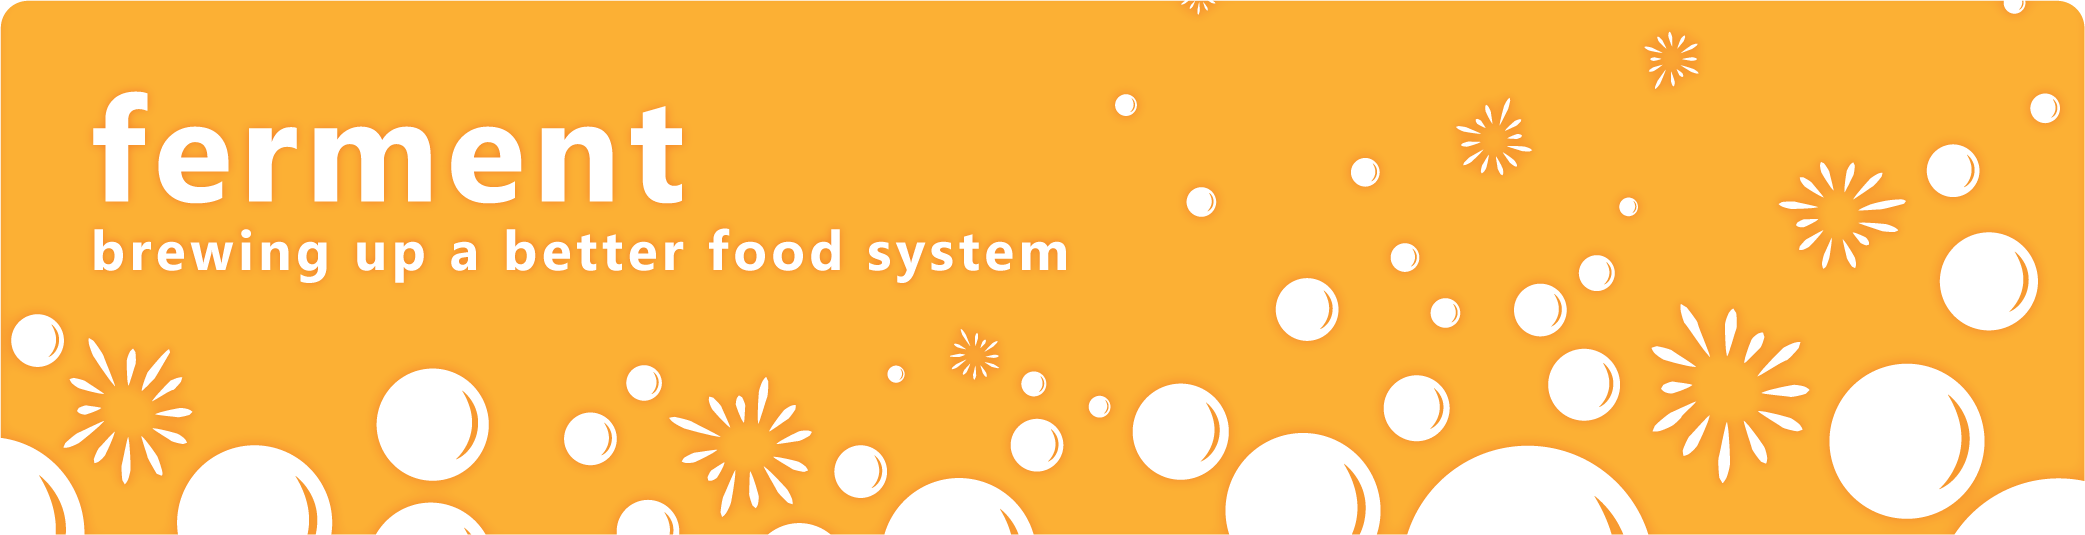 The banner for "Ferment" the community platform of TABLE, with the tagline "brewing up a better food system". The background is bright orange with white bubbles rising and popping.